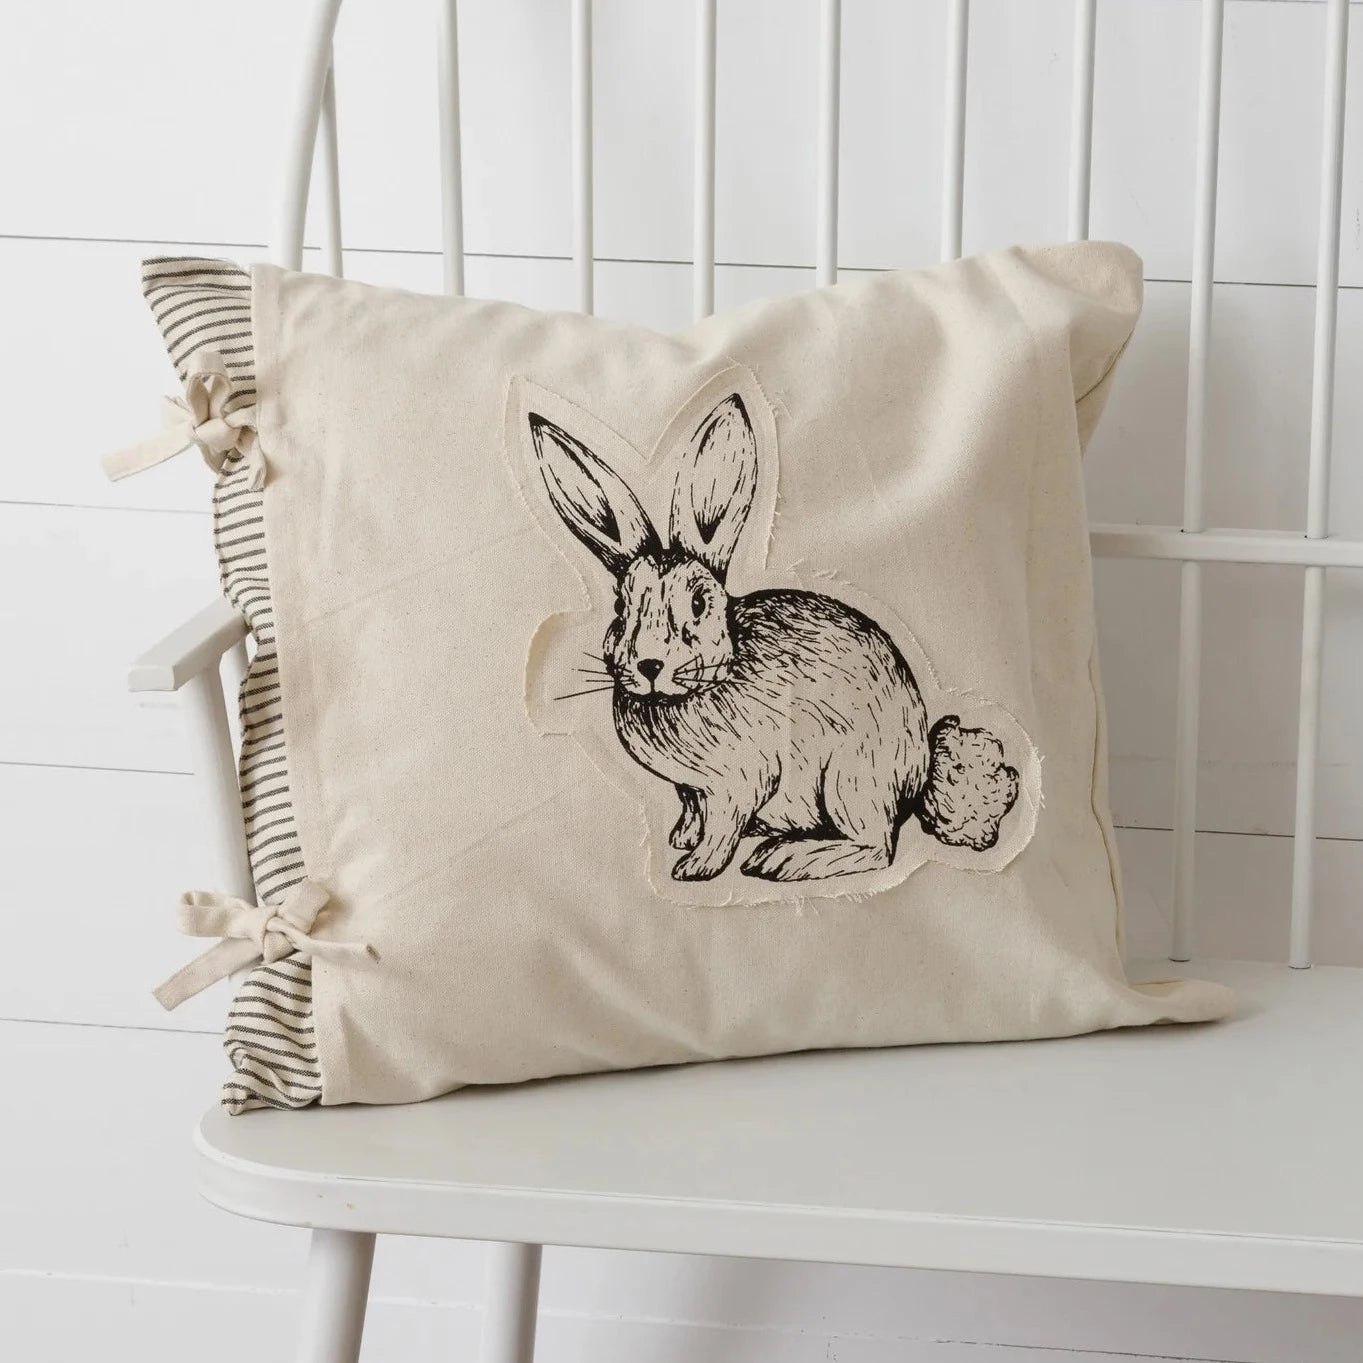 Rabbit with Slip cover pillow 